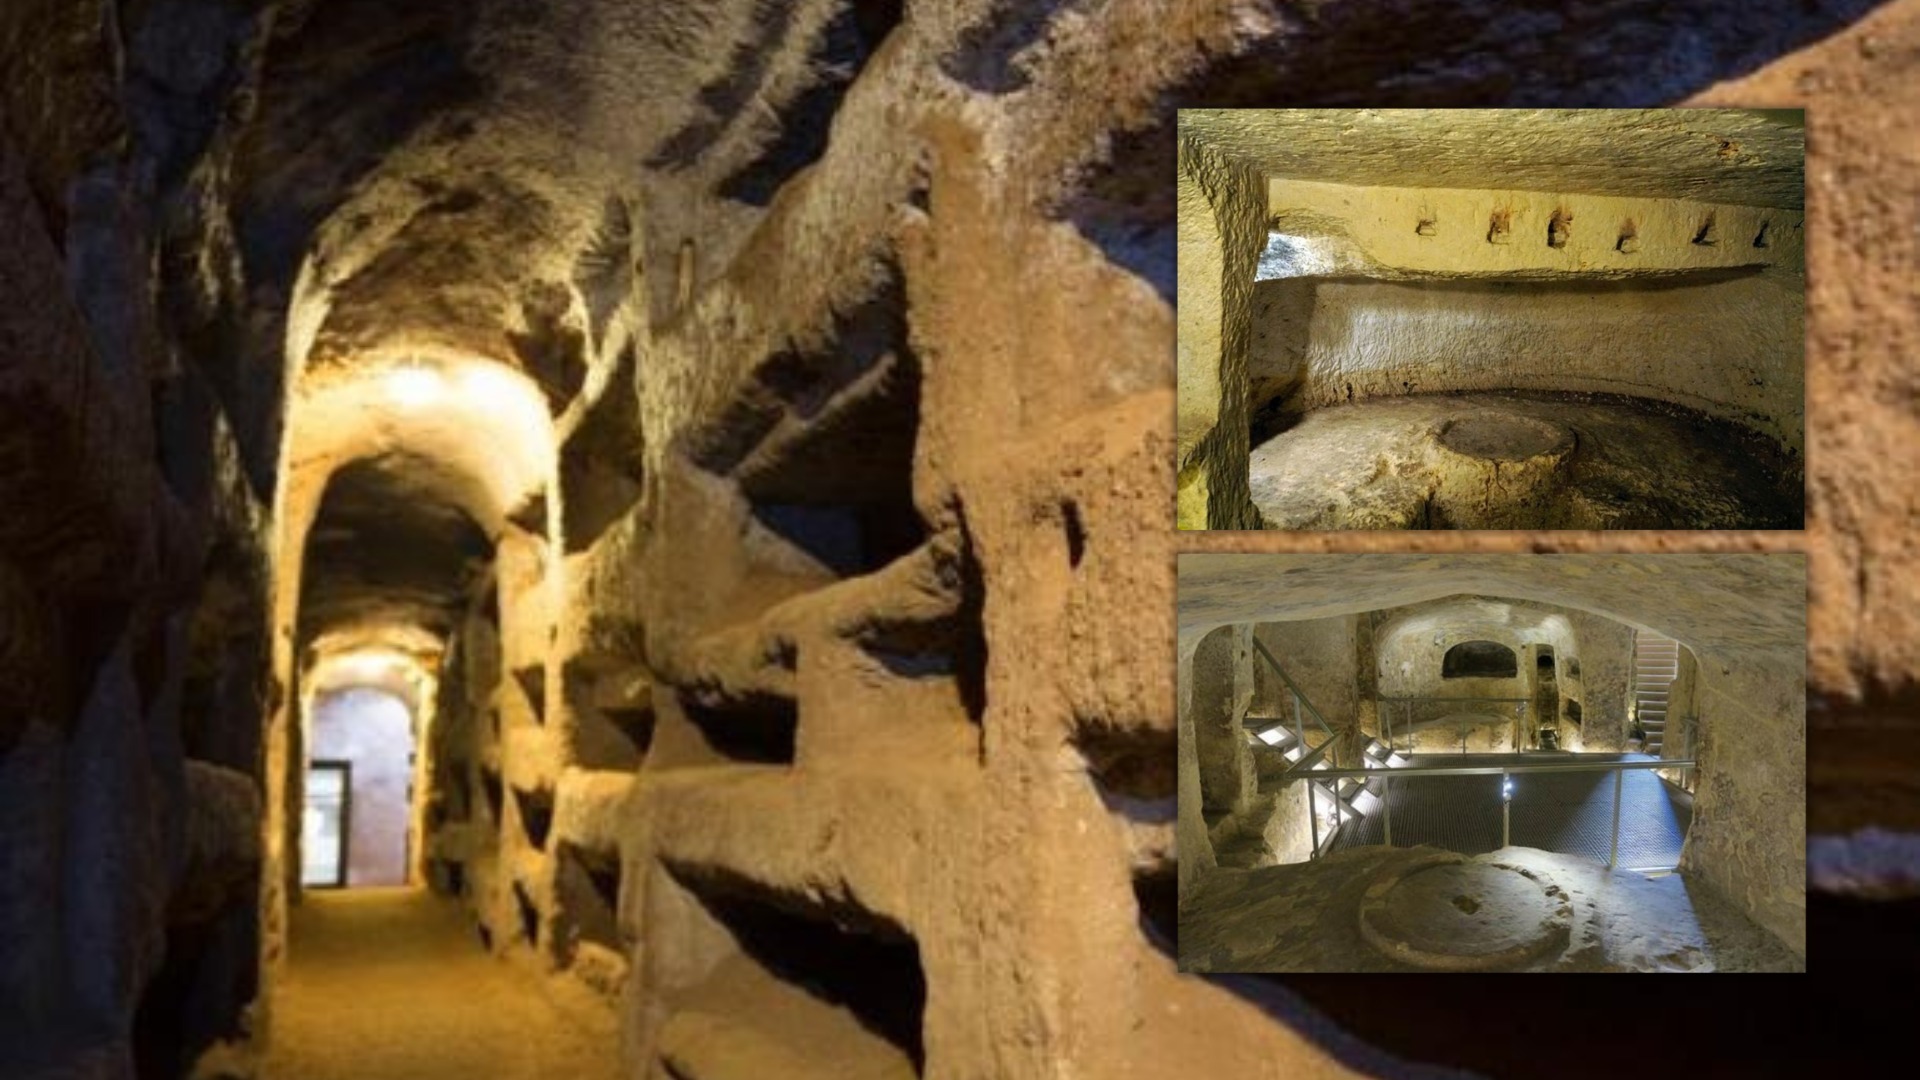 The Mysterious Agape Tables: A Unique Feature of the Maltese Catacombs